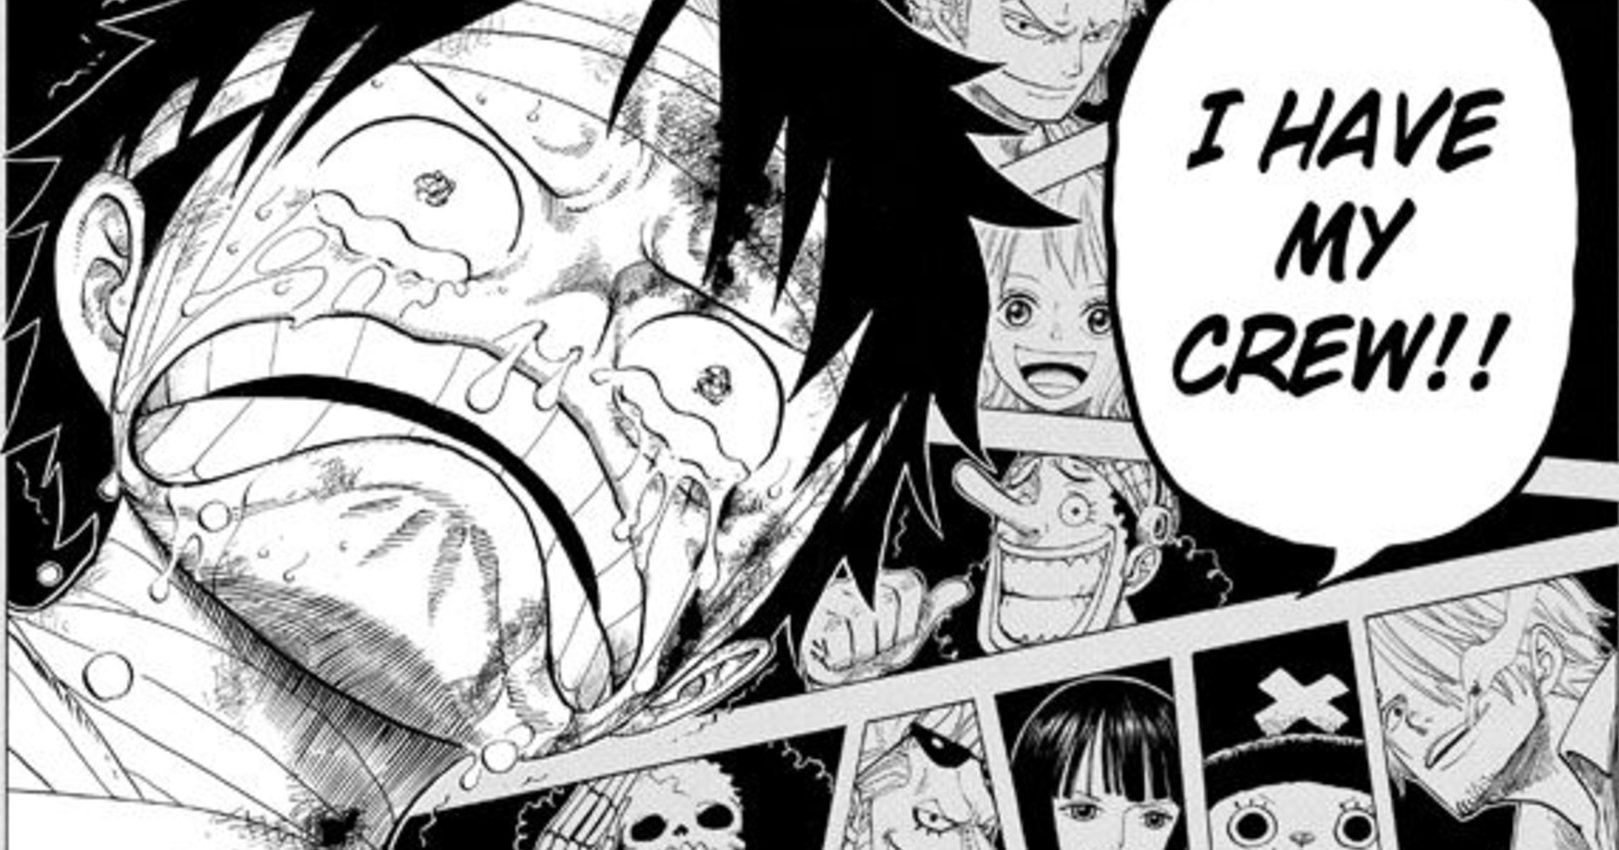 Luffy crying as he and the Straw Hats reunite, stronger than before the time skip